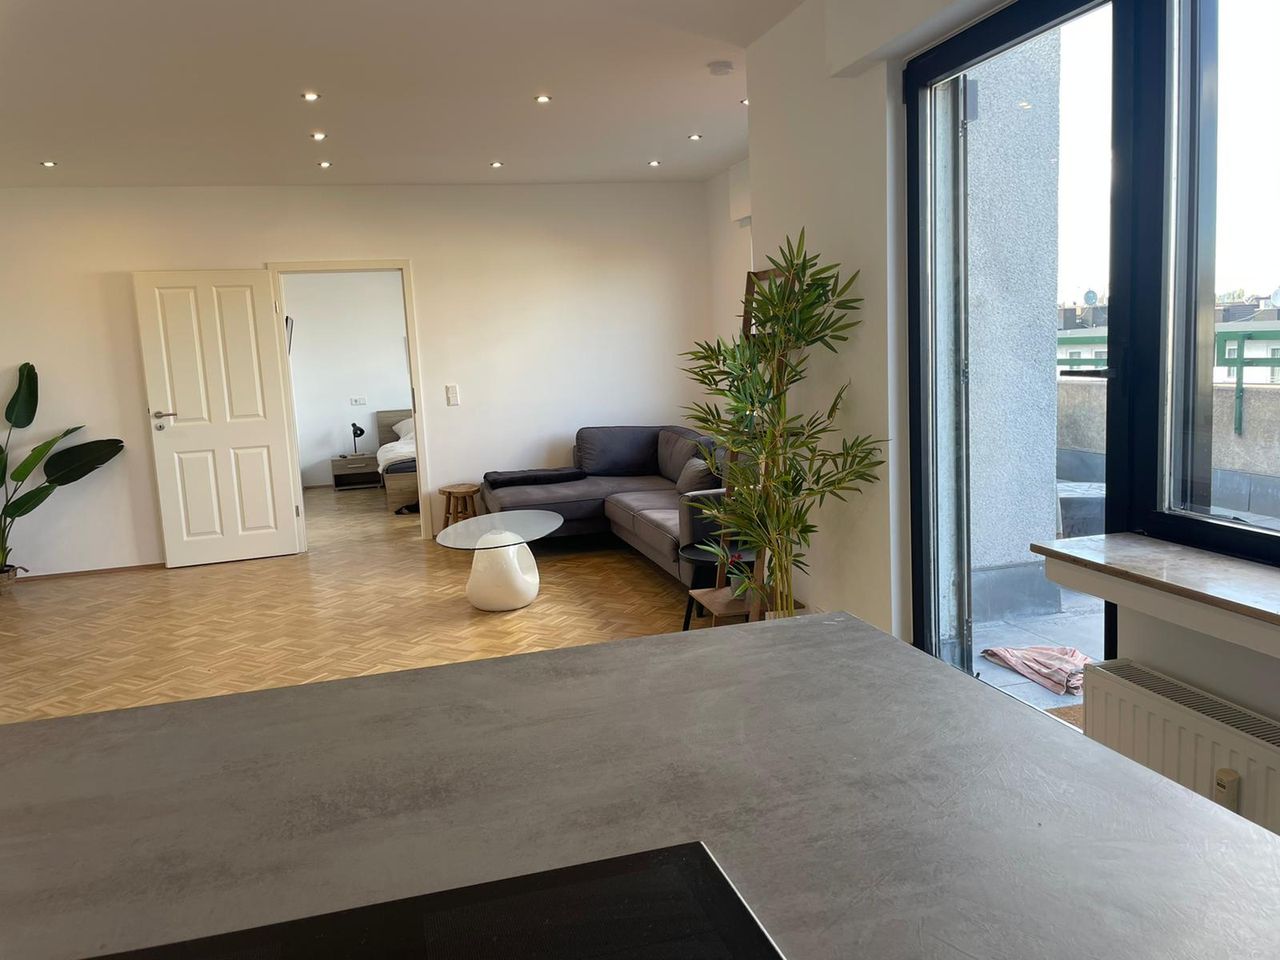 New Penthouse with 50m2 rooftop terrace, lift & underground parking